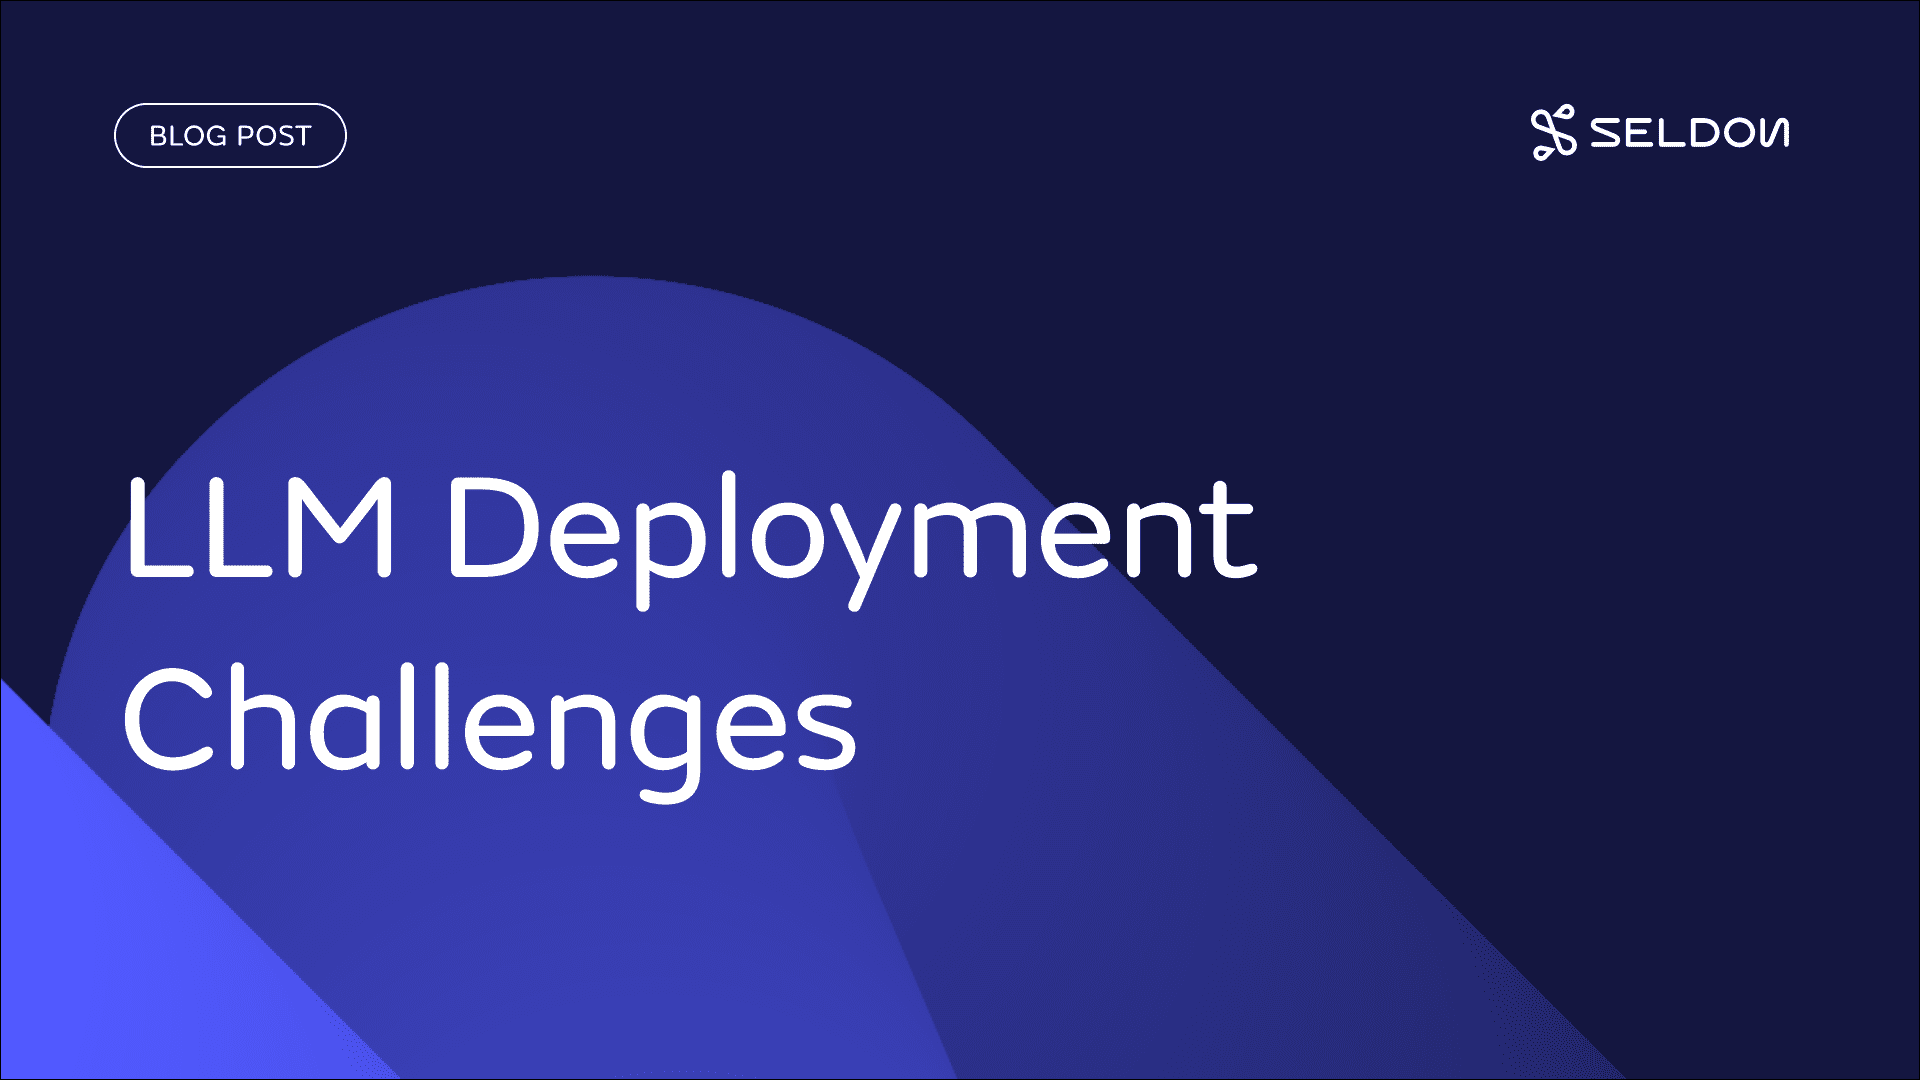 Deploying Large Language Models in Production: LLM Deployment Challenges